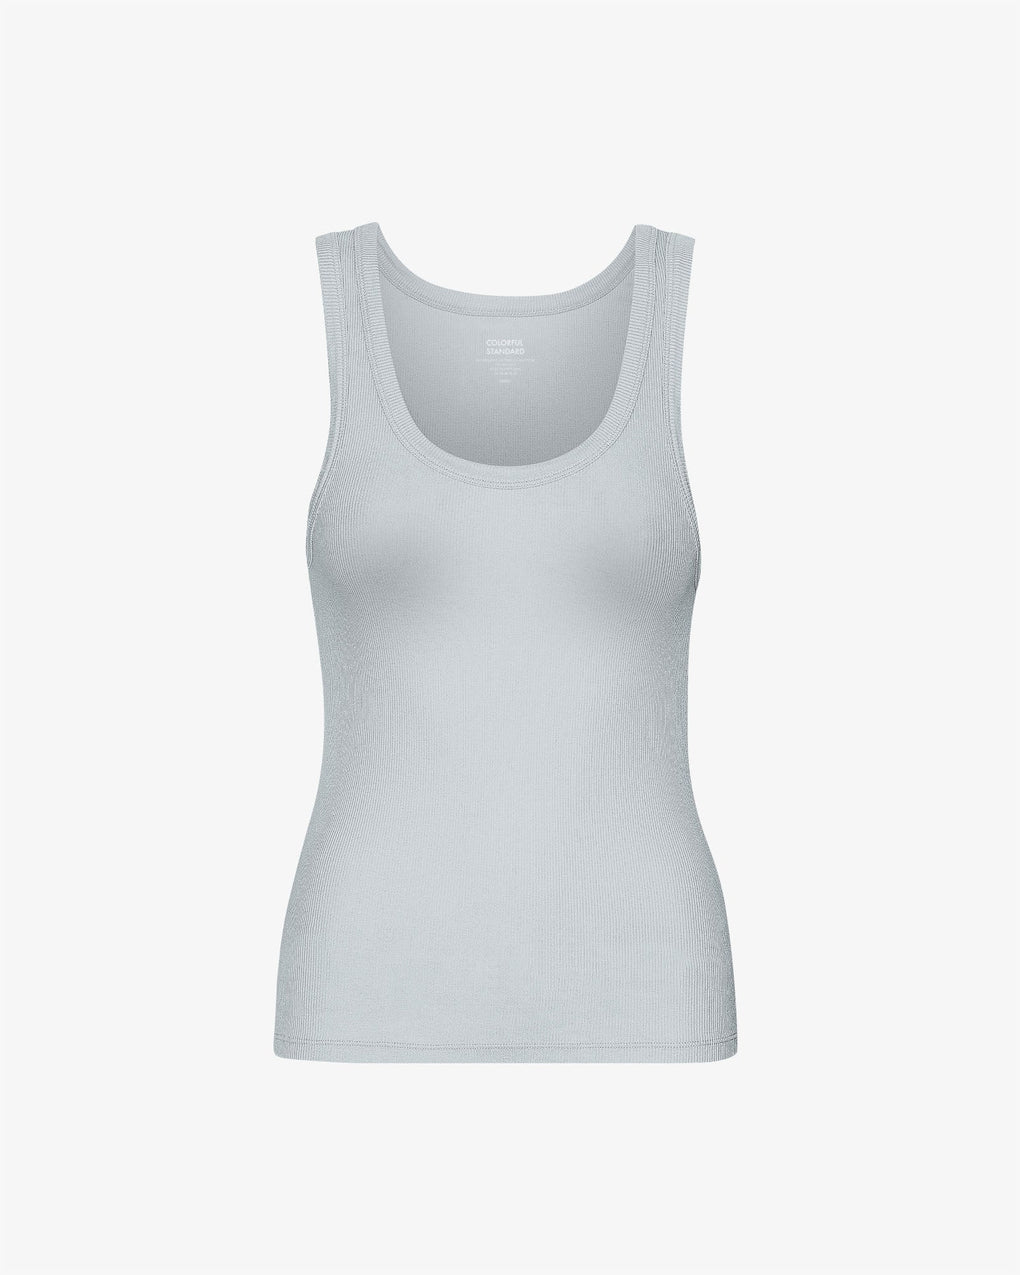 RIBBED TANK TOP BY COLORFUL STANDARD